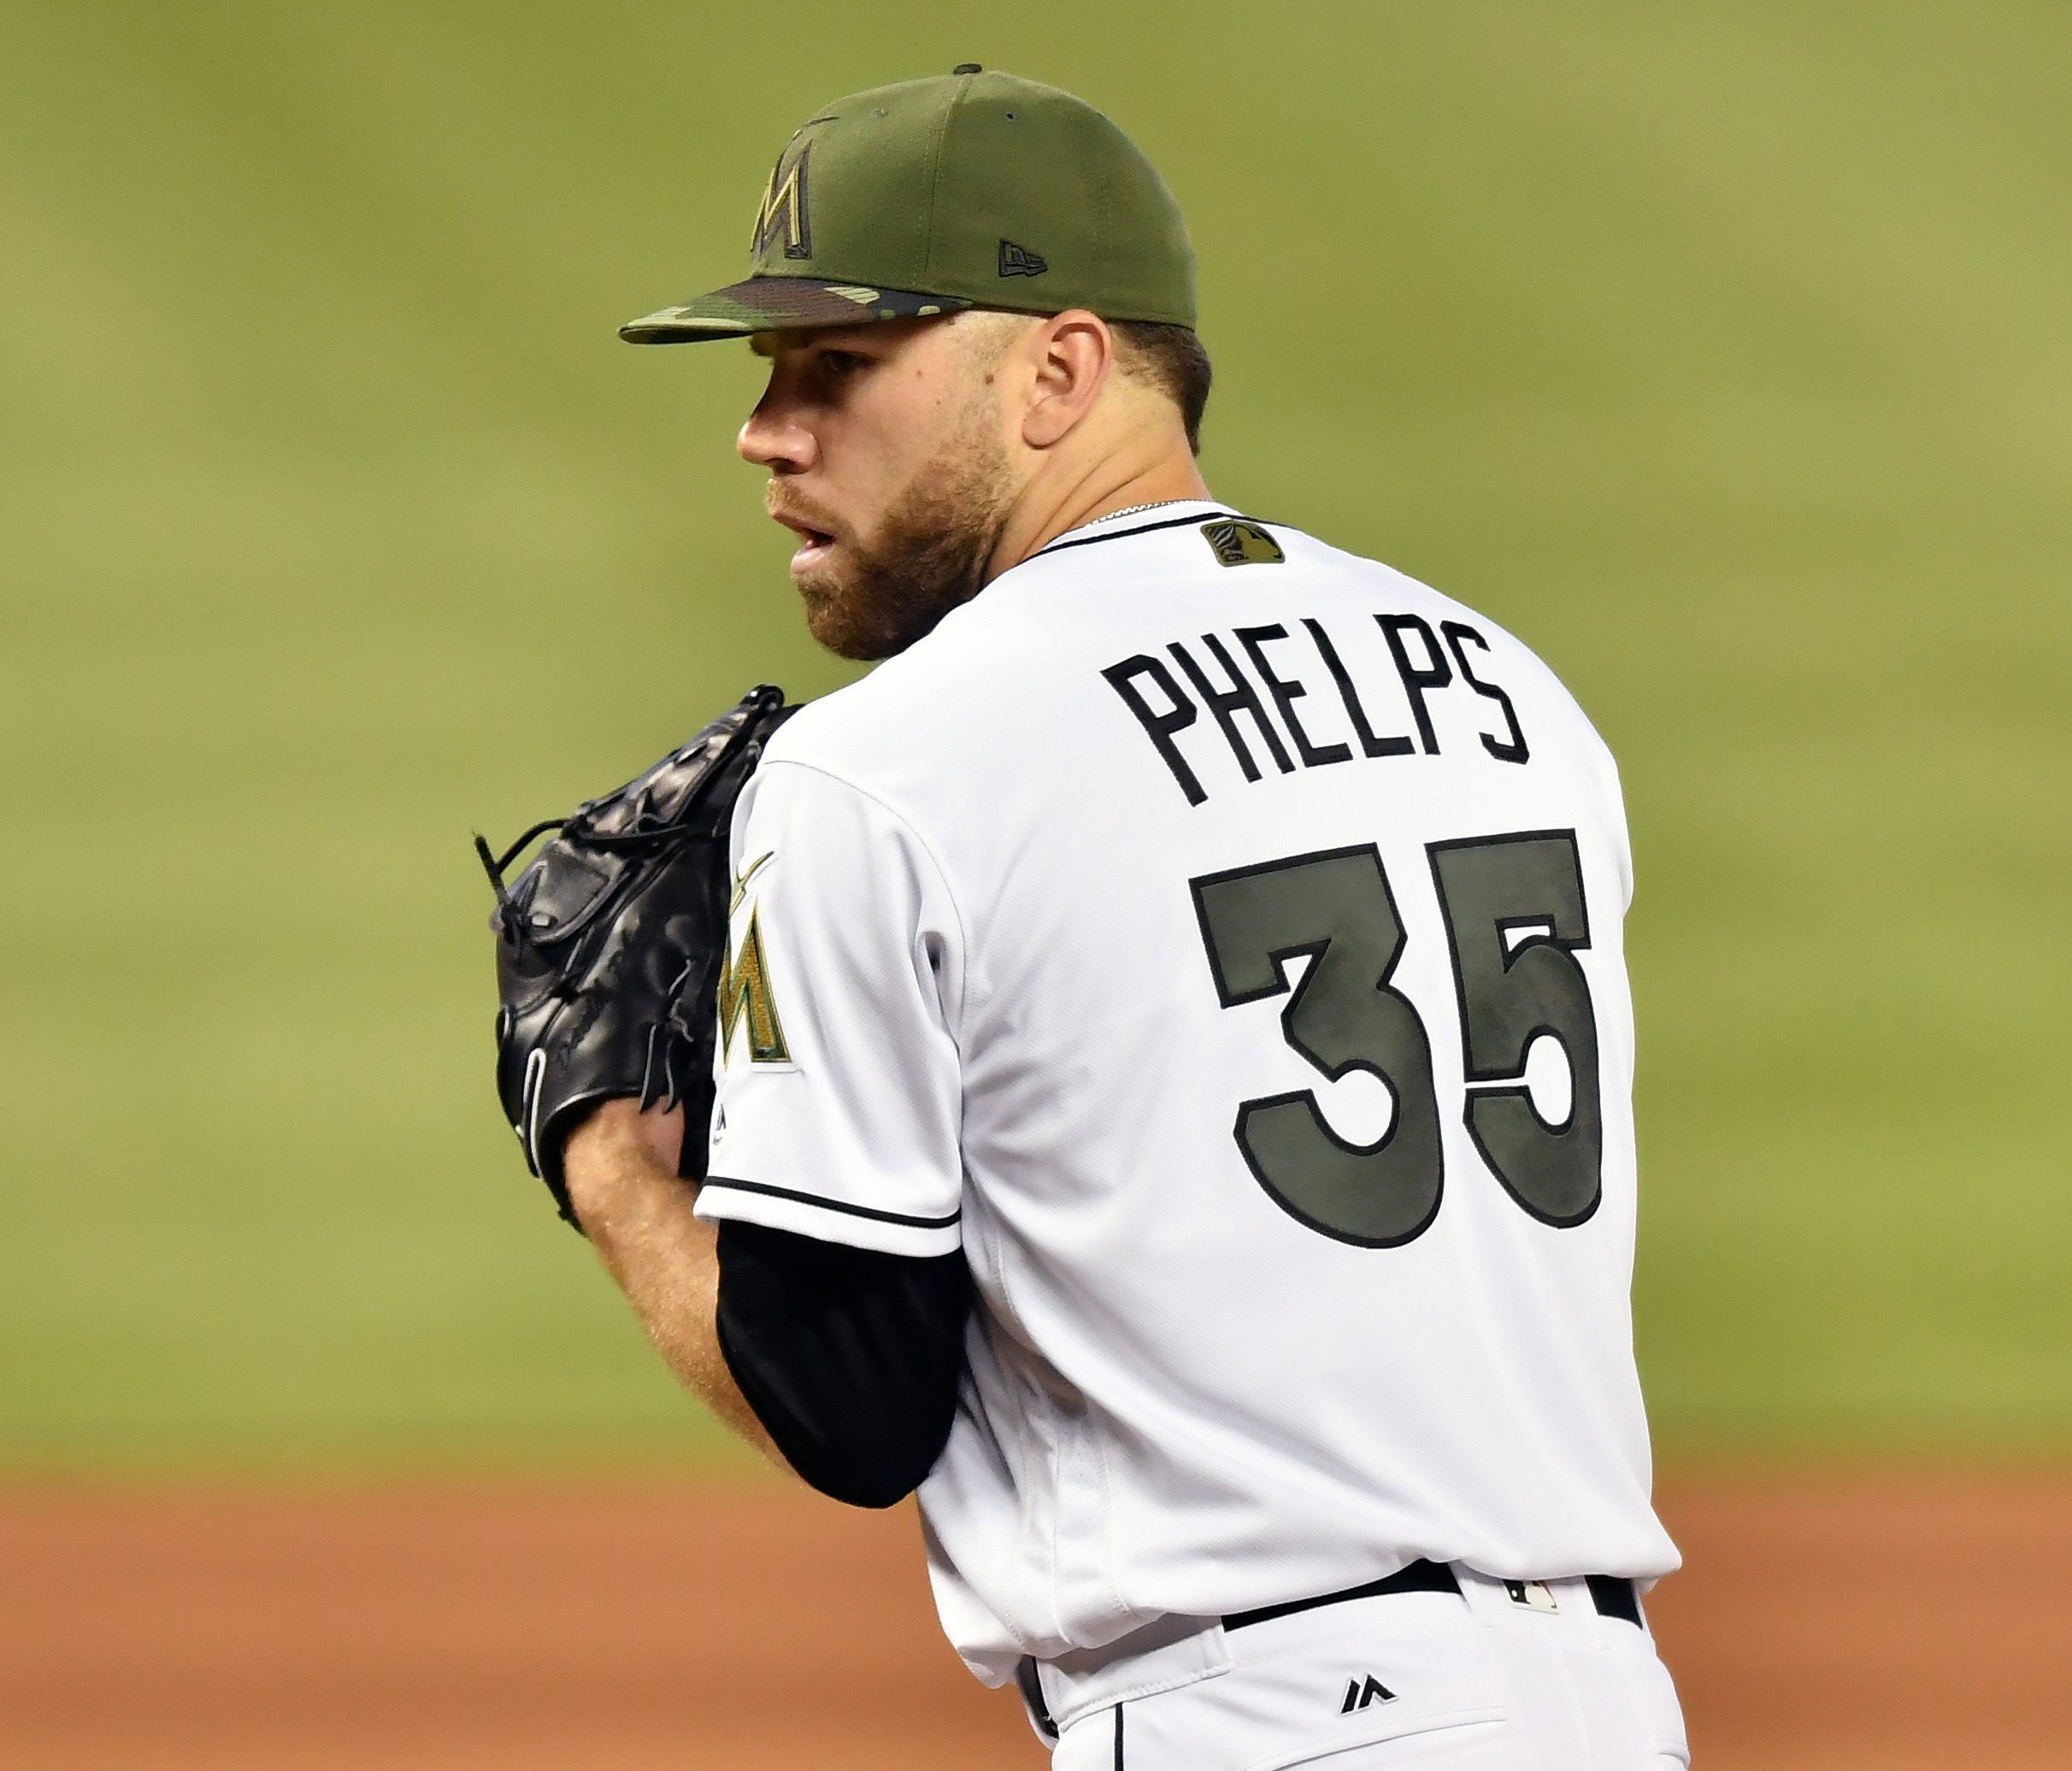 Reliever David Phelps has a 3.45 ERA with 18 holds in 47 innings.